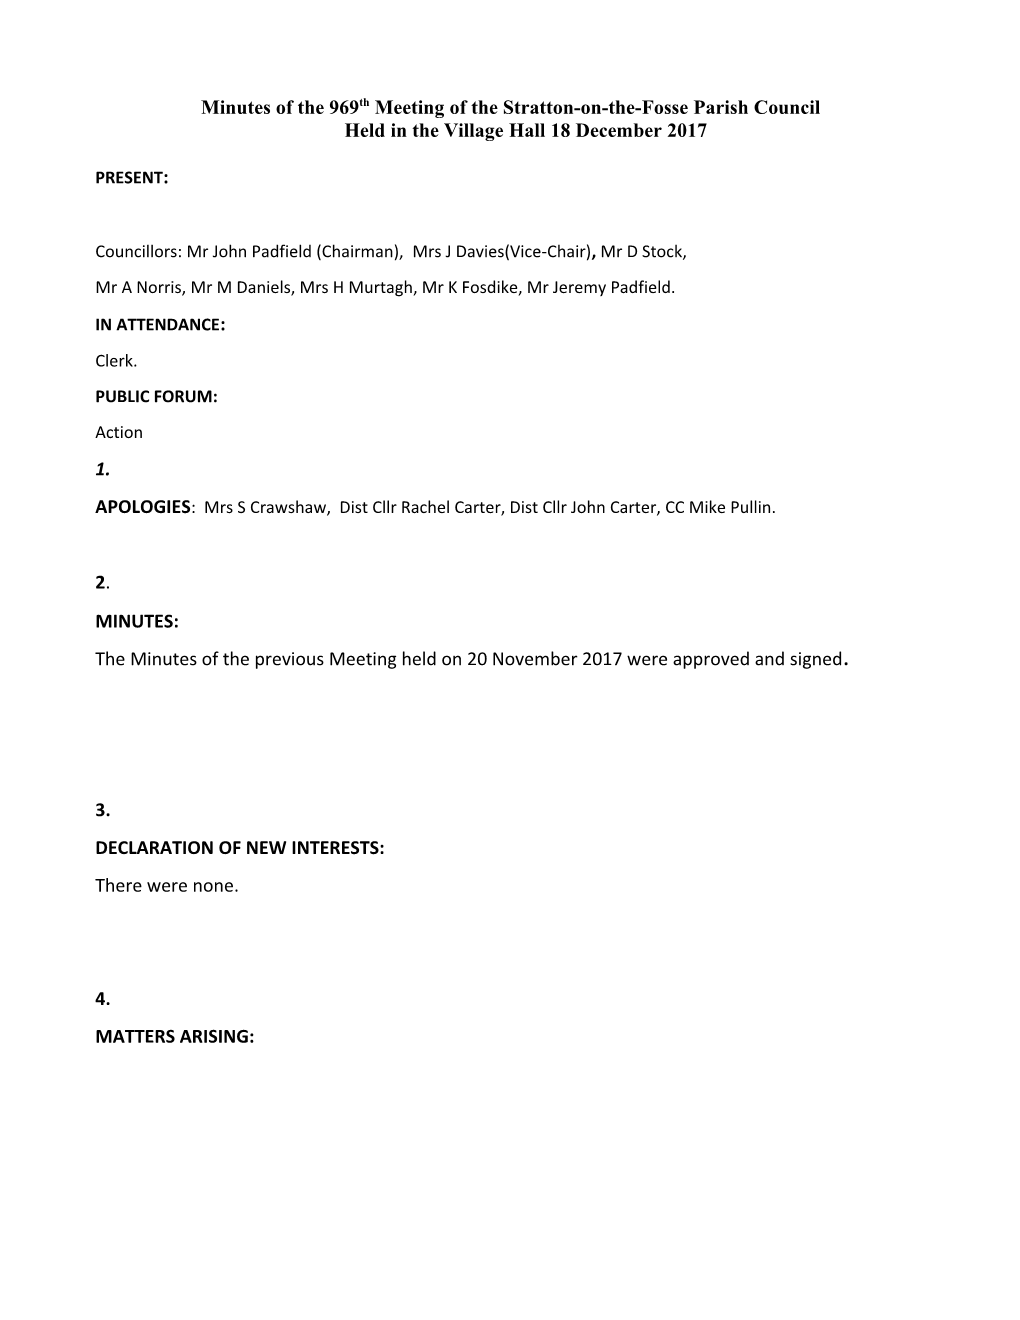 Minutes of the 969Th Meeting of the Stratton-On-The-Fosse Parish Council